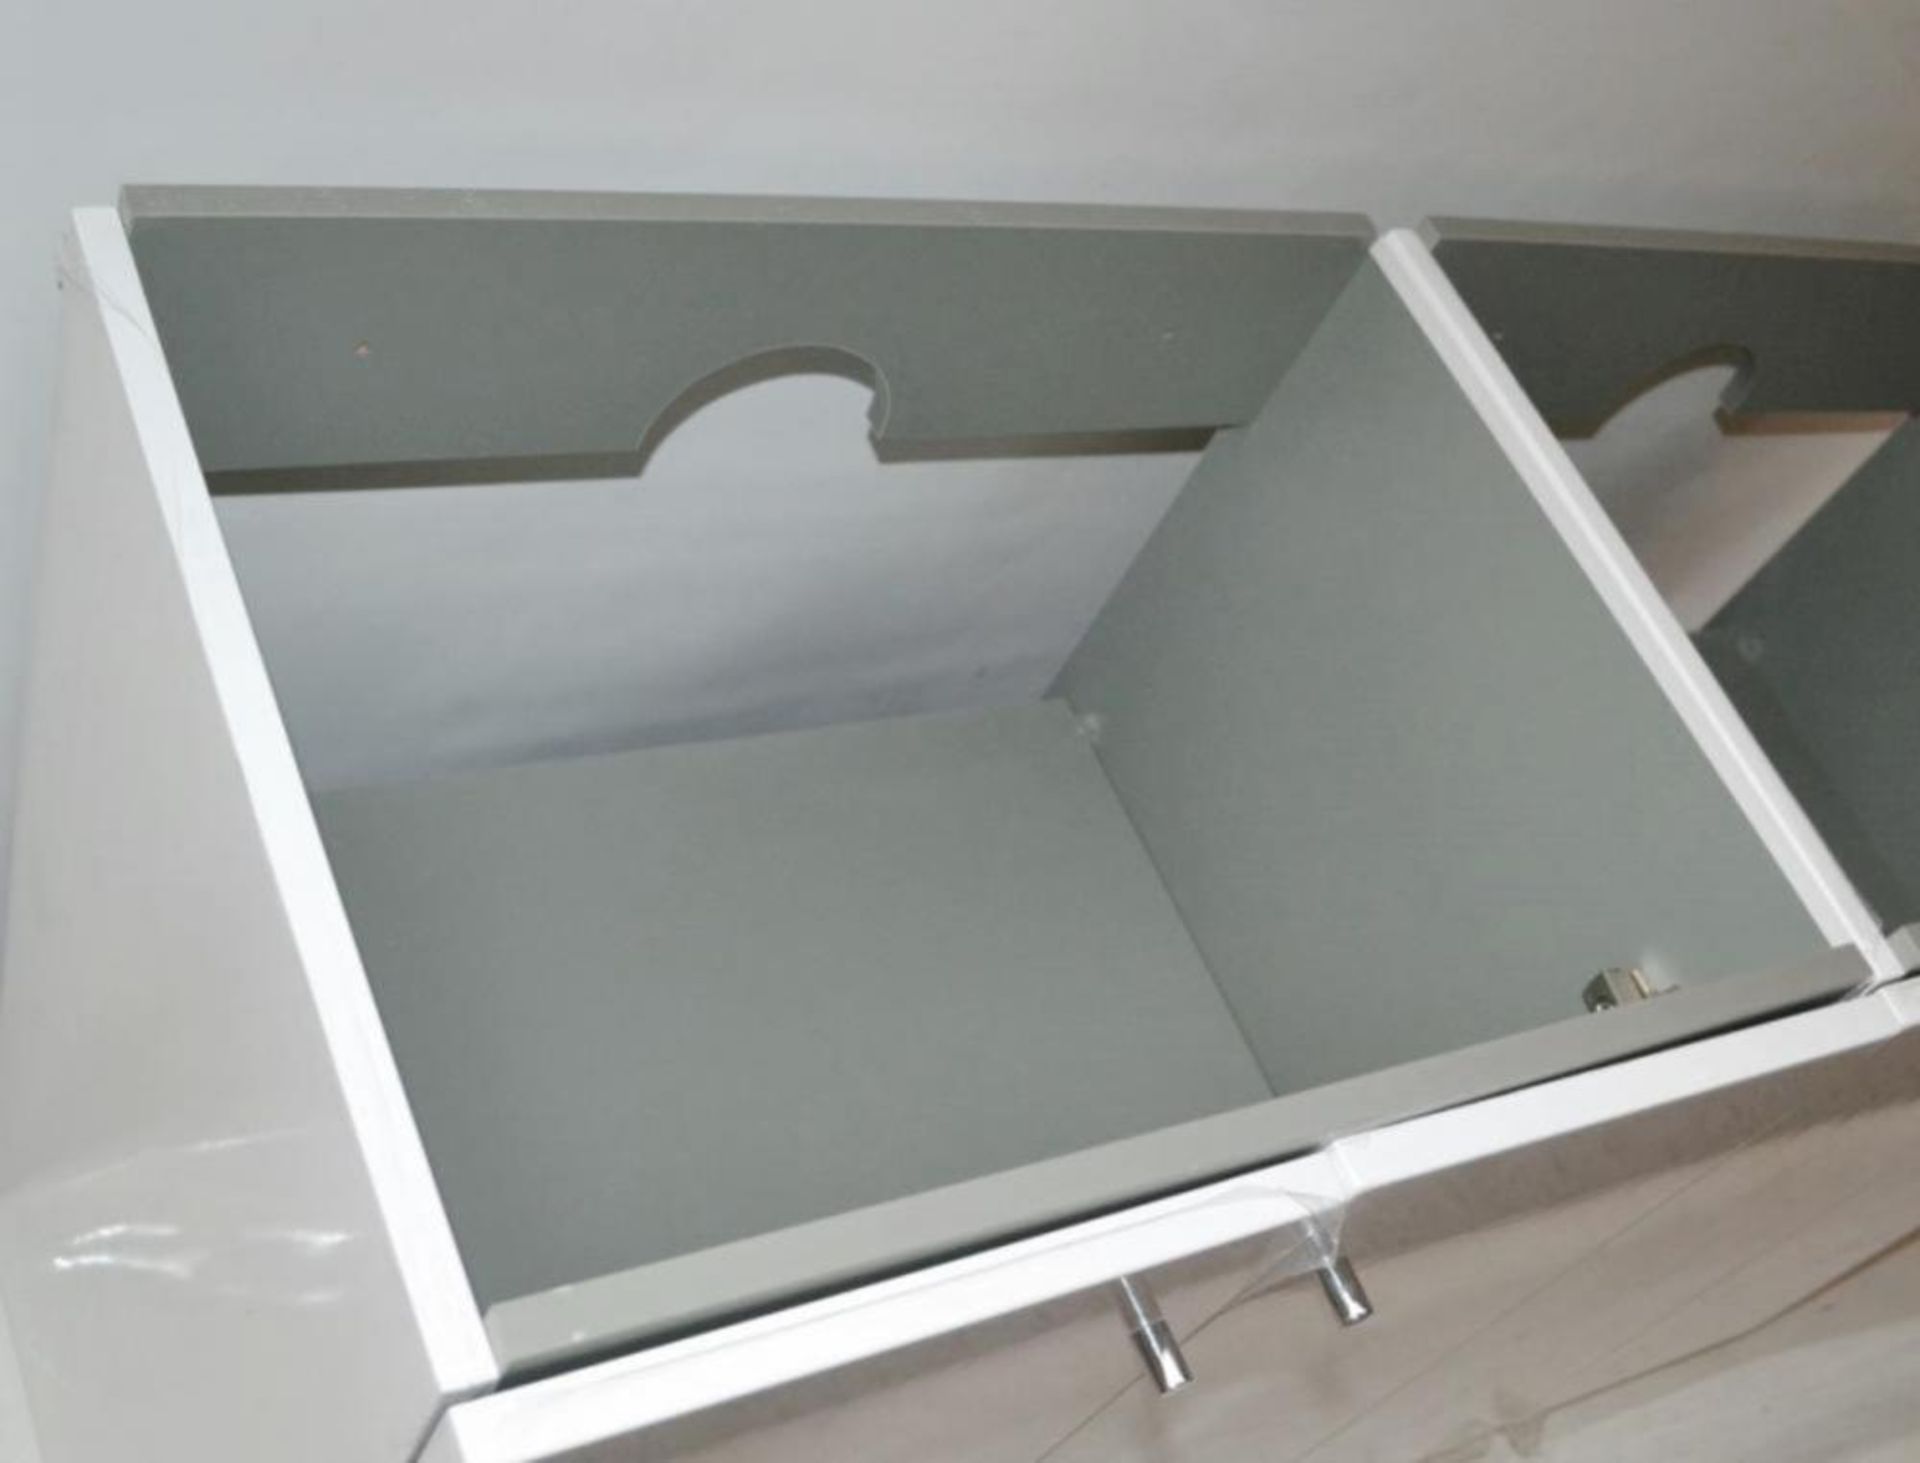 1 x His & Hers Double Bathroom Vanity Unit - 1200mm Wide - Features a High Gloss White Finish and So - Image 7 of 7